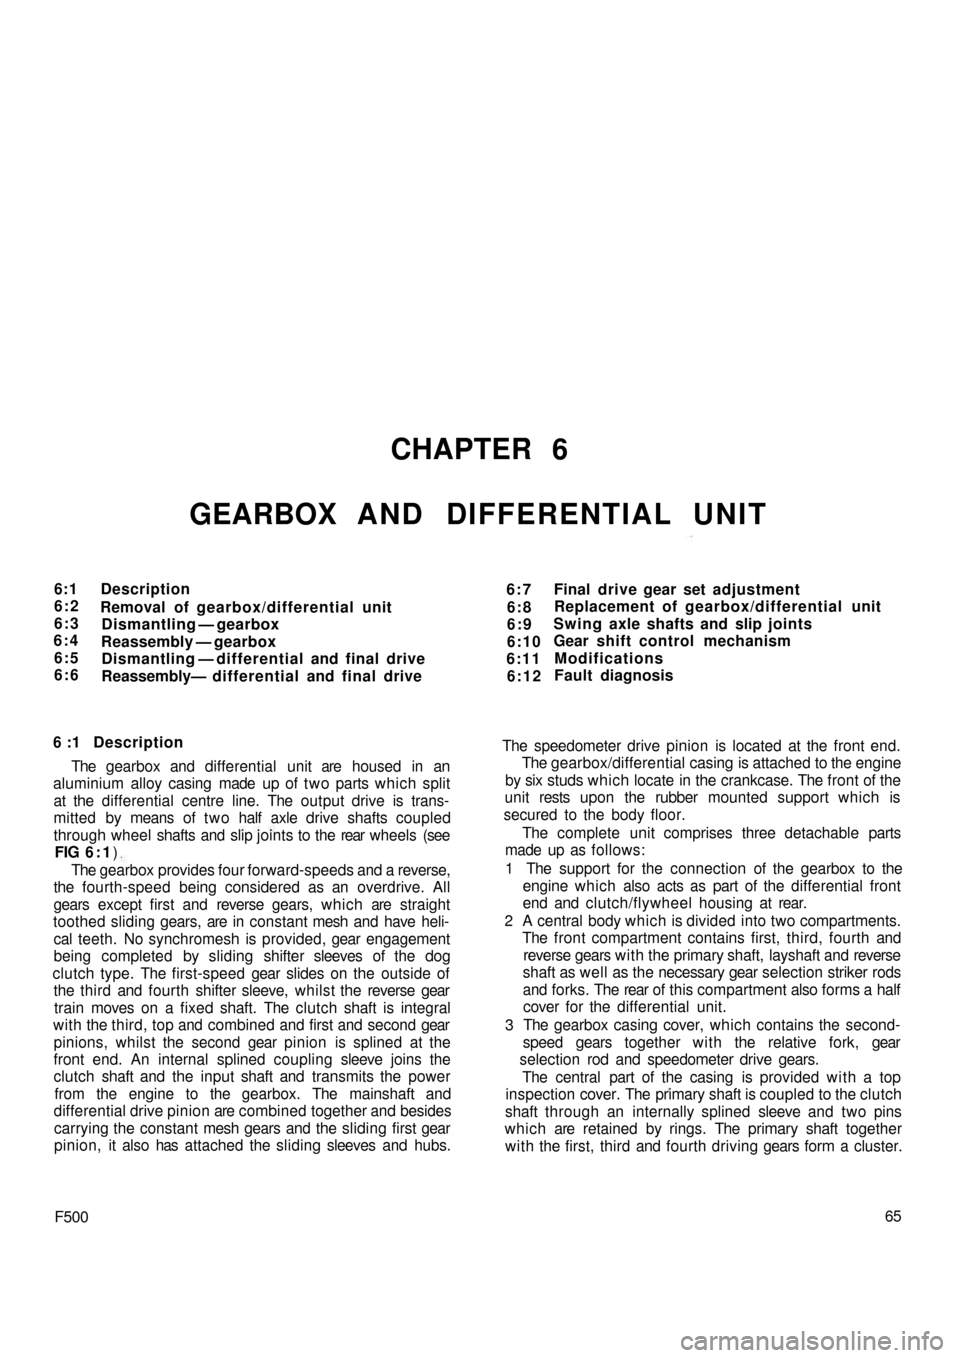 FIAT 500 1960 1.G Workshop Manual CHAPTER 6
GEARBOX AND DIFFERENTIAL UNIT
6:1
6:2
6:3
6:4
6:5
6:6Description
Removal of gearbox/differential unit
Dismantling — gearbox
Reassembly — gearbox
Dismantling — differential and final dr